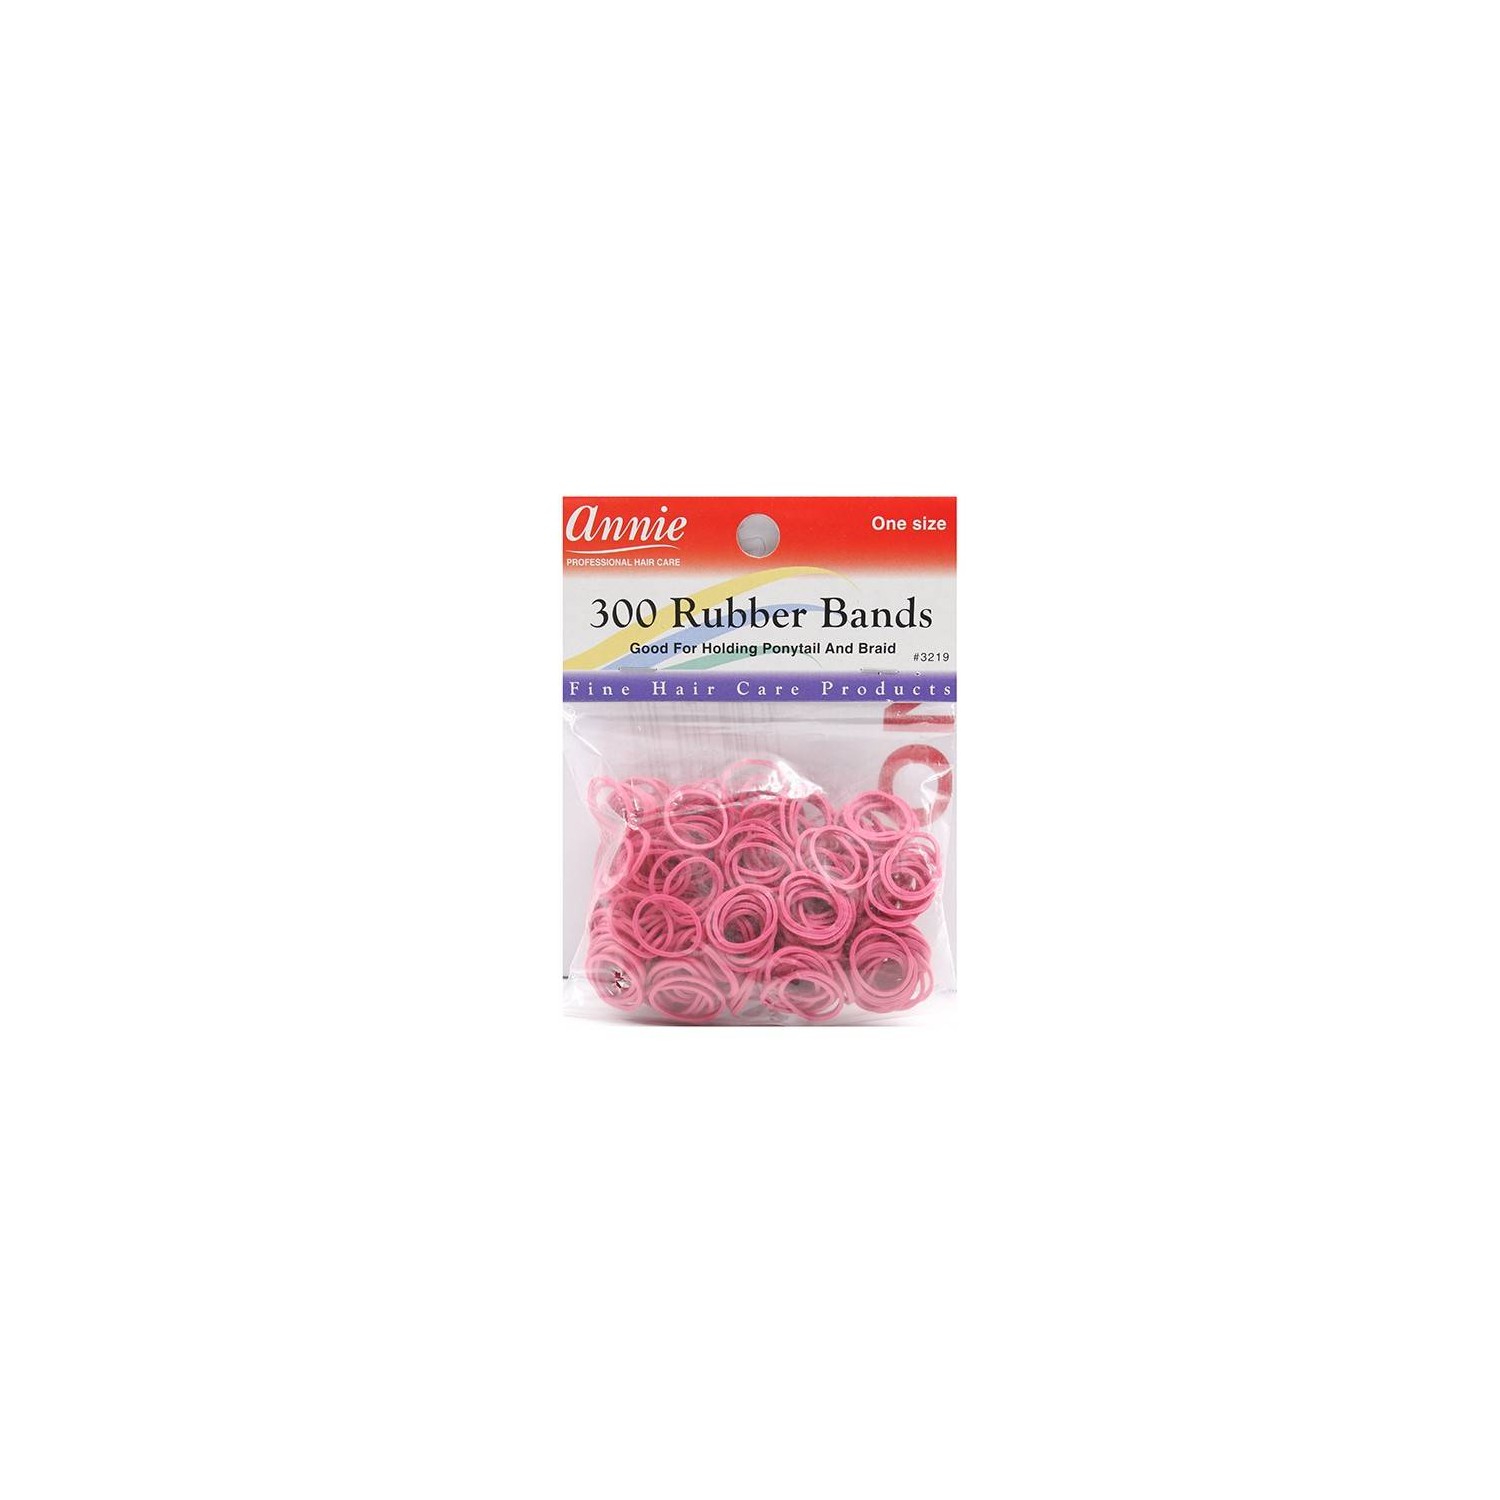 Annie 300 Rubber Bands Rose 3219 (gommes)